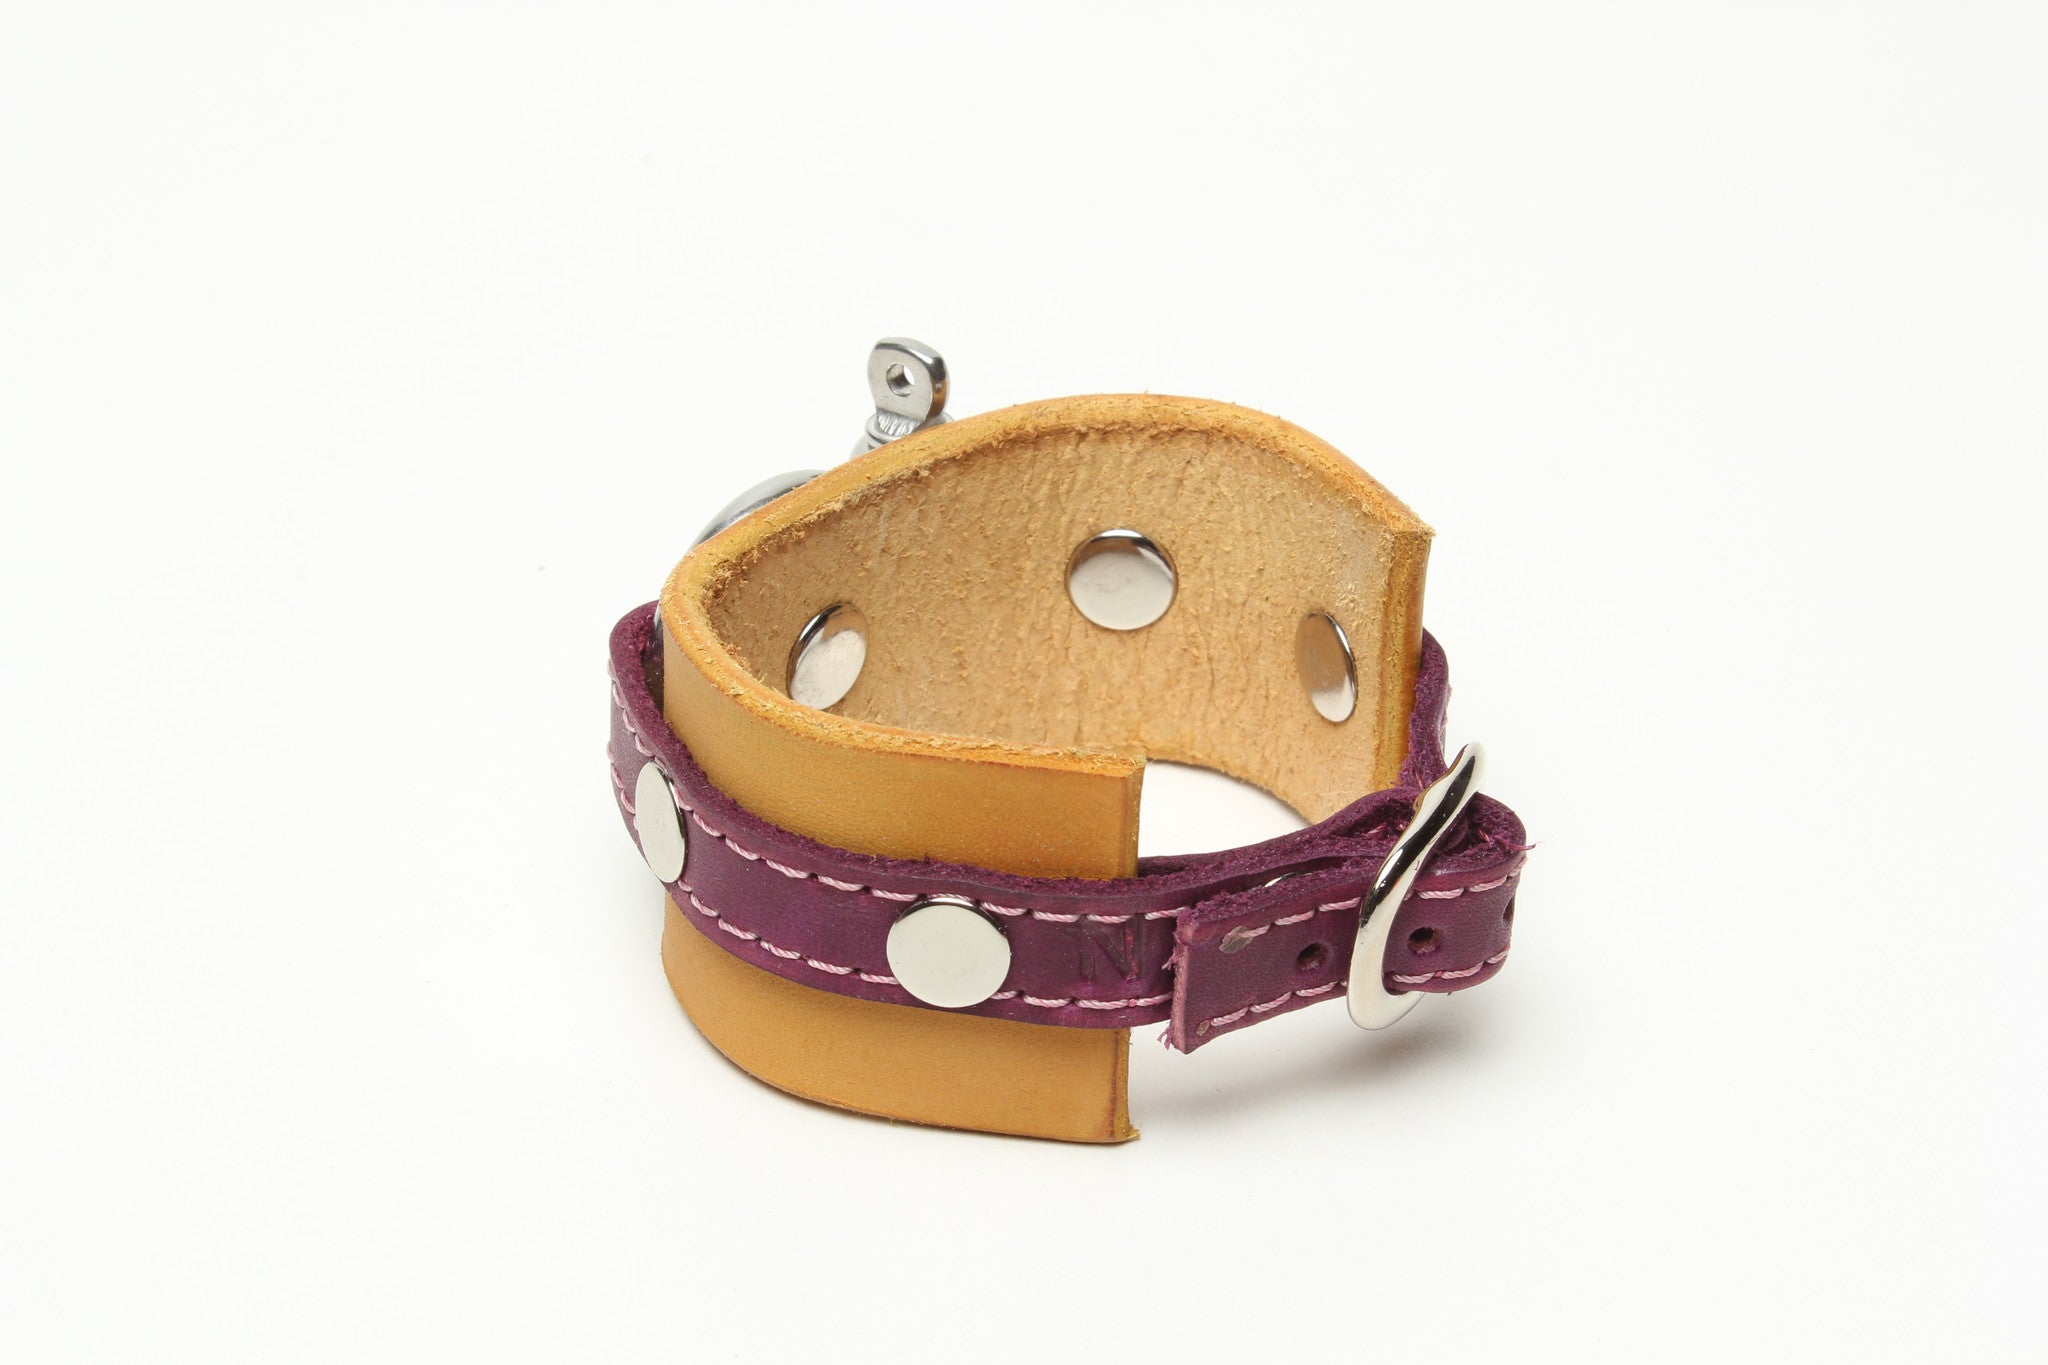 LATIGO LEATHER CUFF WITH ANCHOR SHACKLE bicolor by nyet jewelry.